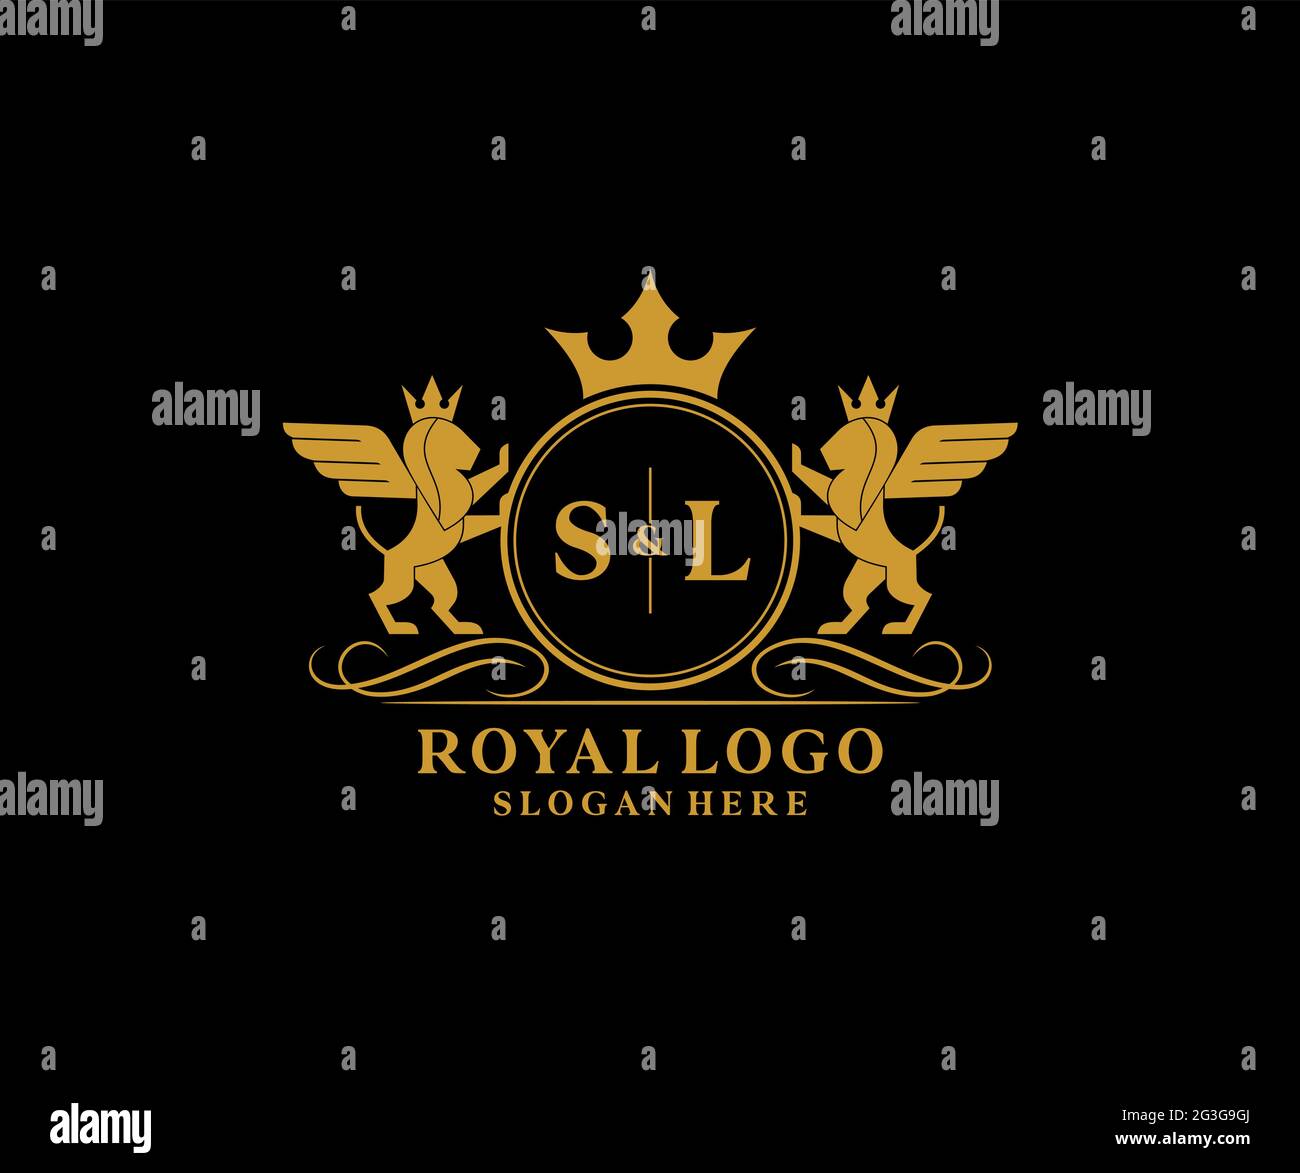 SL Letter Lion Royal Luxury Heraldic,Crest Logo template in vector art for Restaurant, Royalty, Boutique, Cafe, Hotel, Heraldic, Jewelry, Fashion and Stock Vector